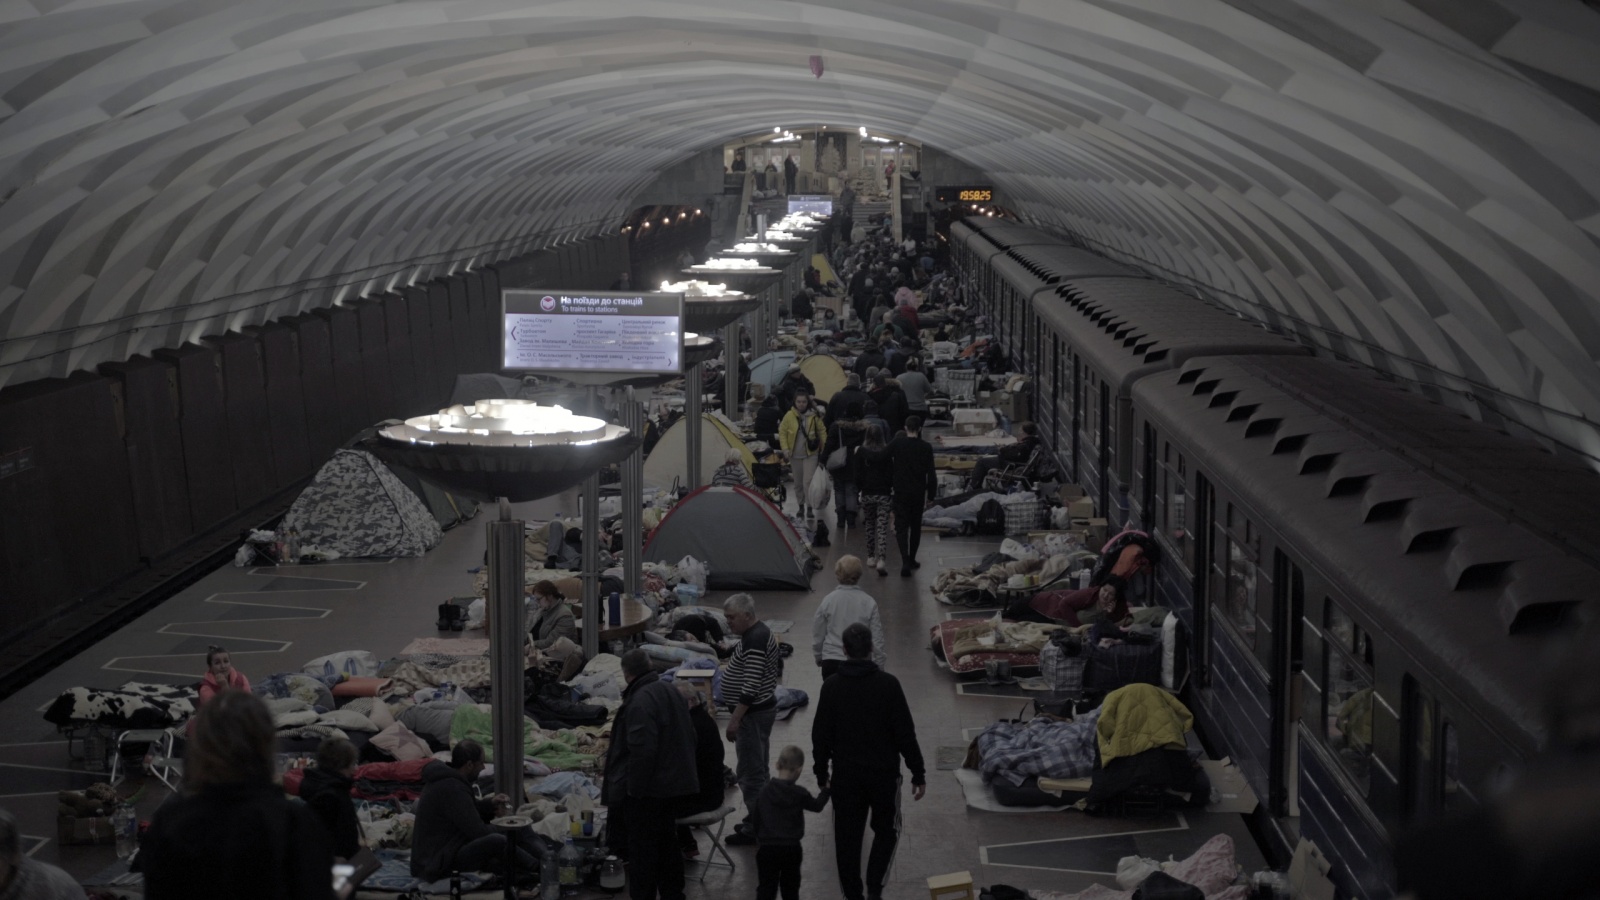 eng: People are hiding at the metro station which is used as a shelter.